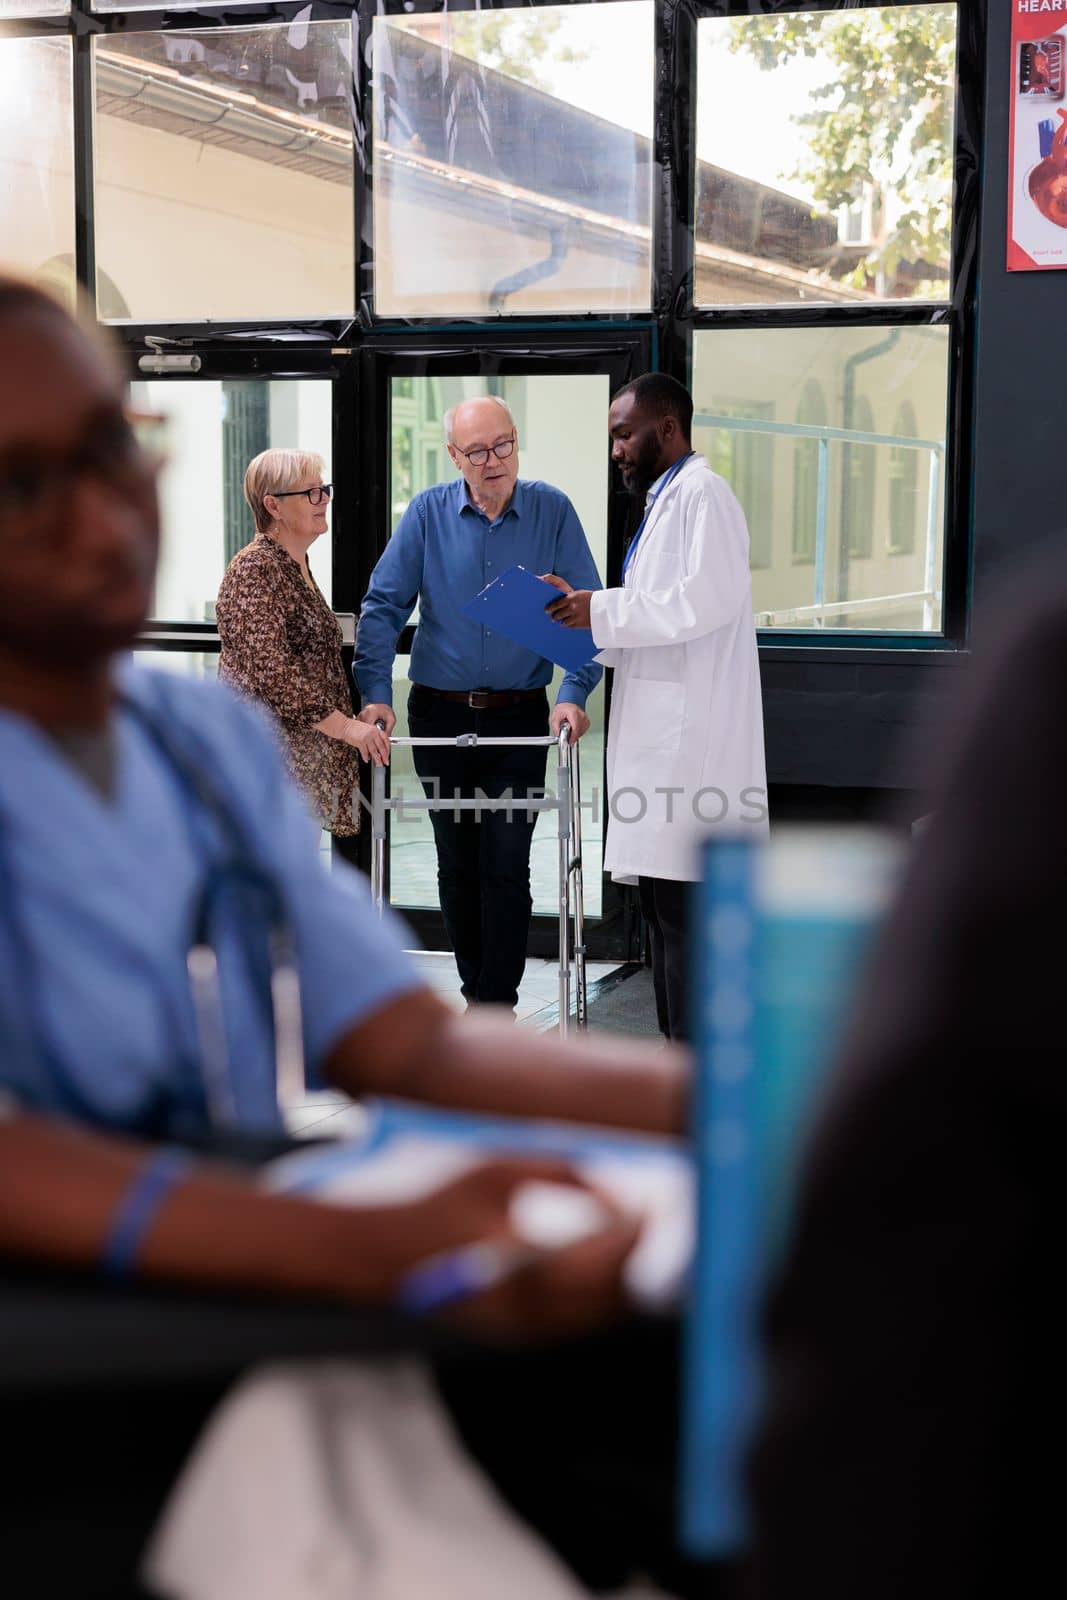 Practitioner doctor discussing illness symptoms with injured elderly patient before start medical consultation. Old man with walking frame having appointment in hospital waiting lobby